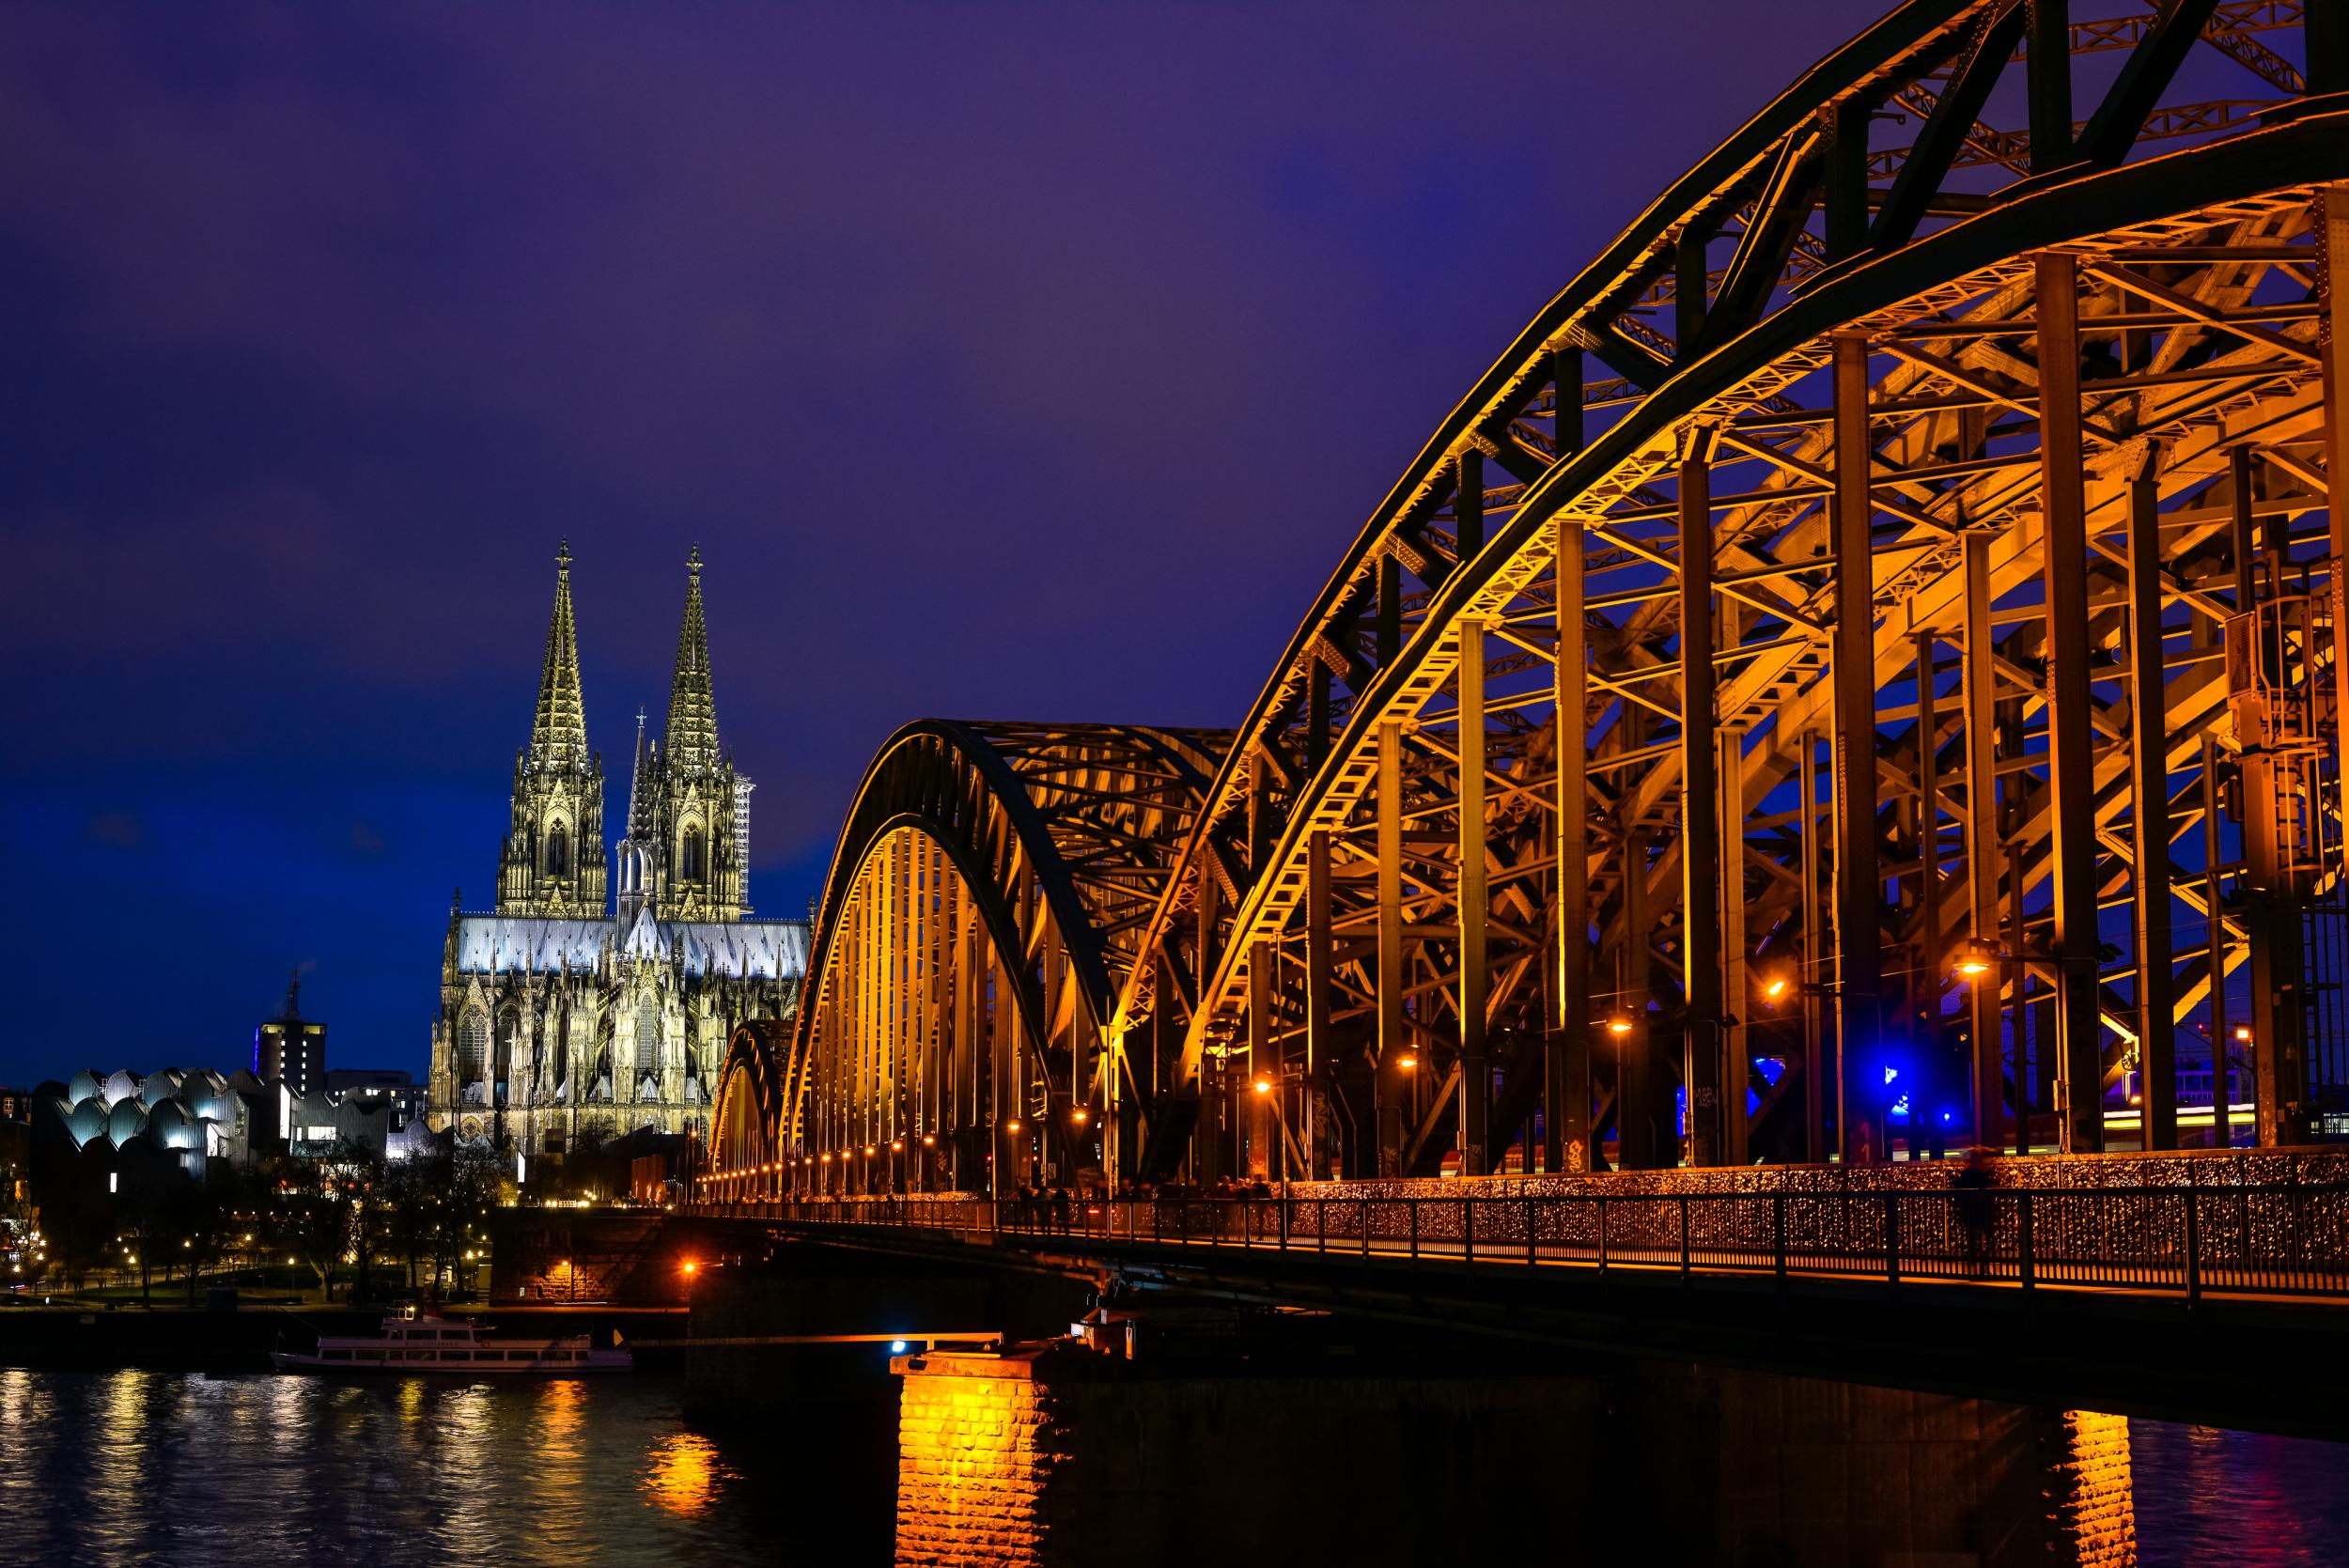 Passengers would change trains in Cologne for onward destinations such as London